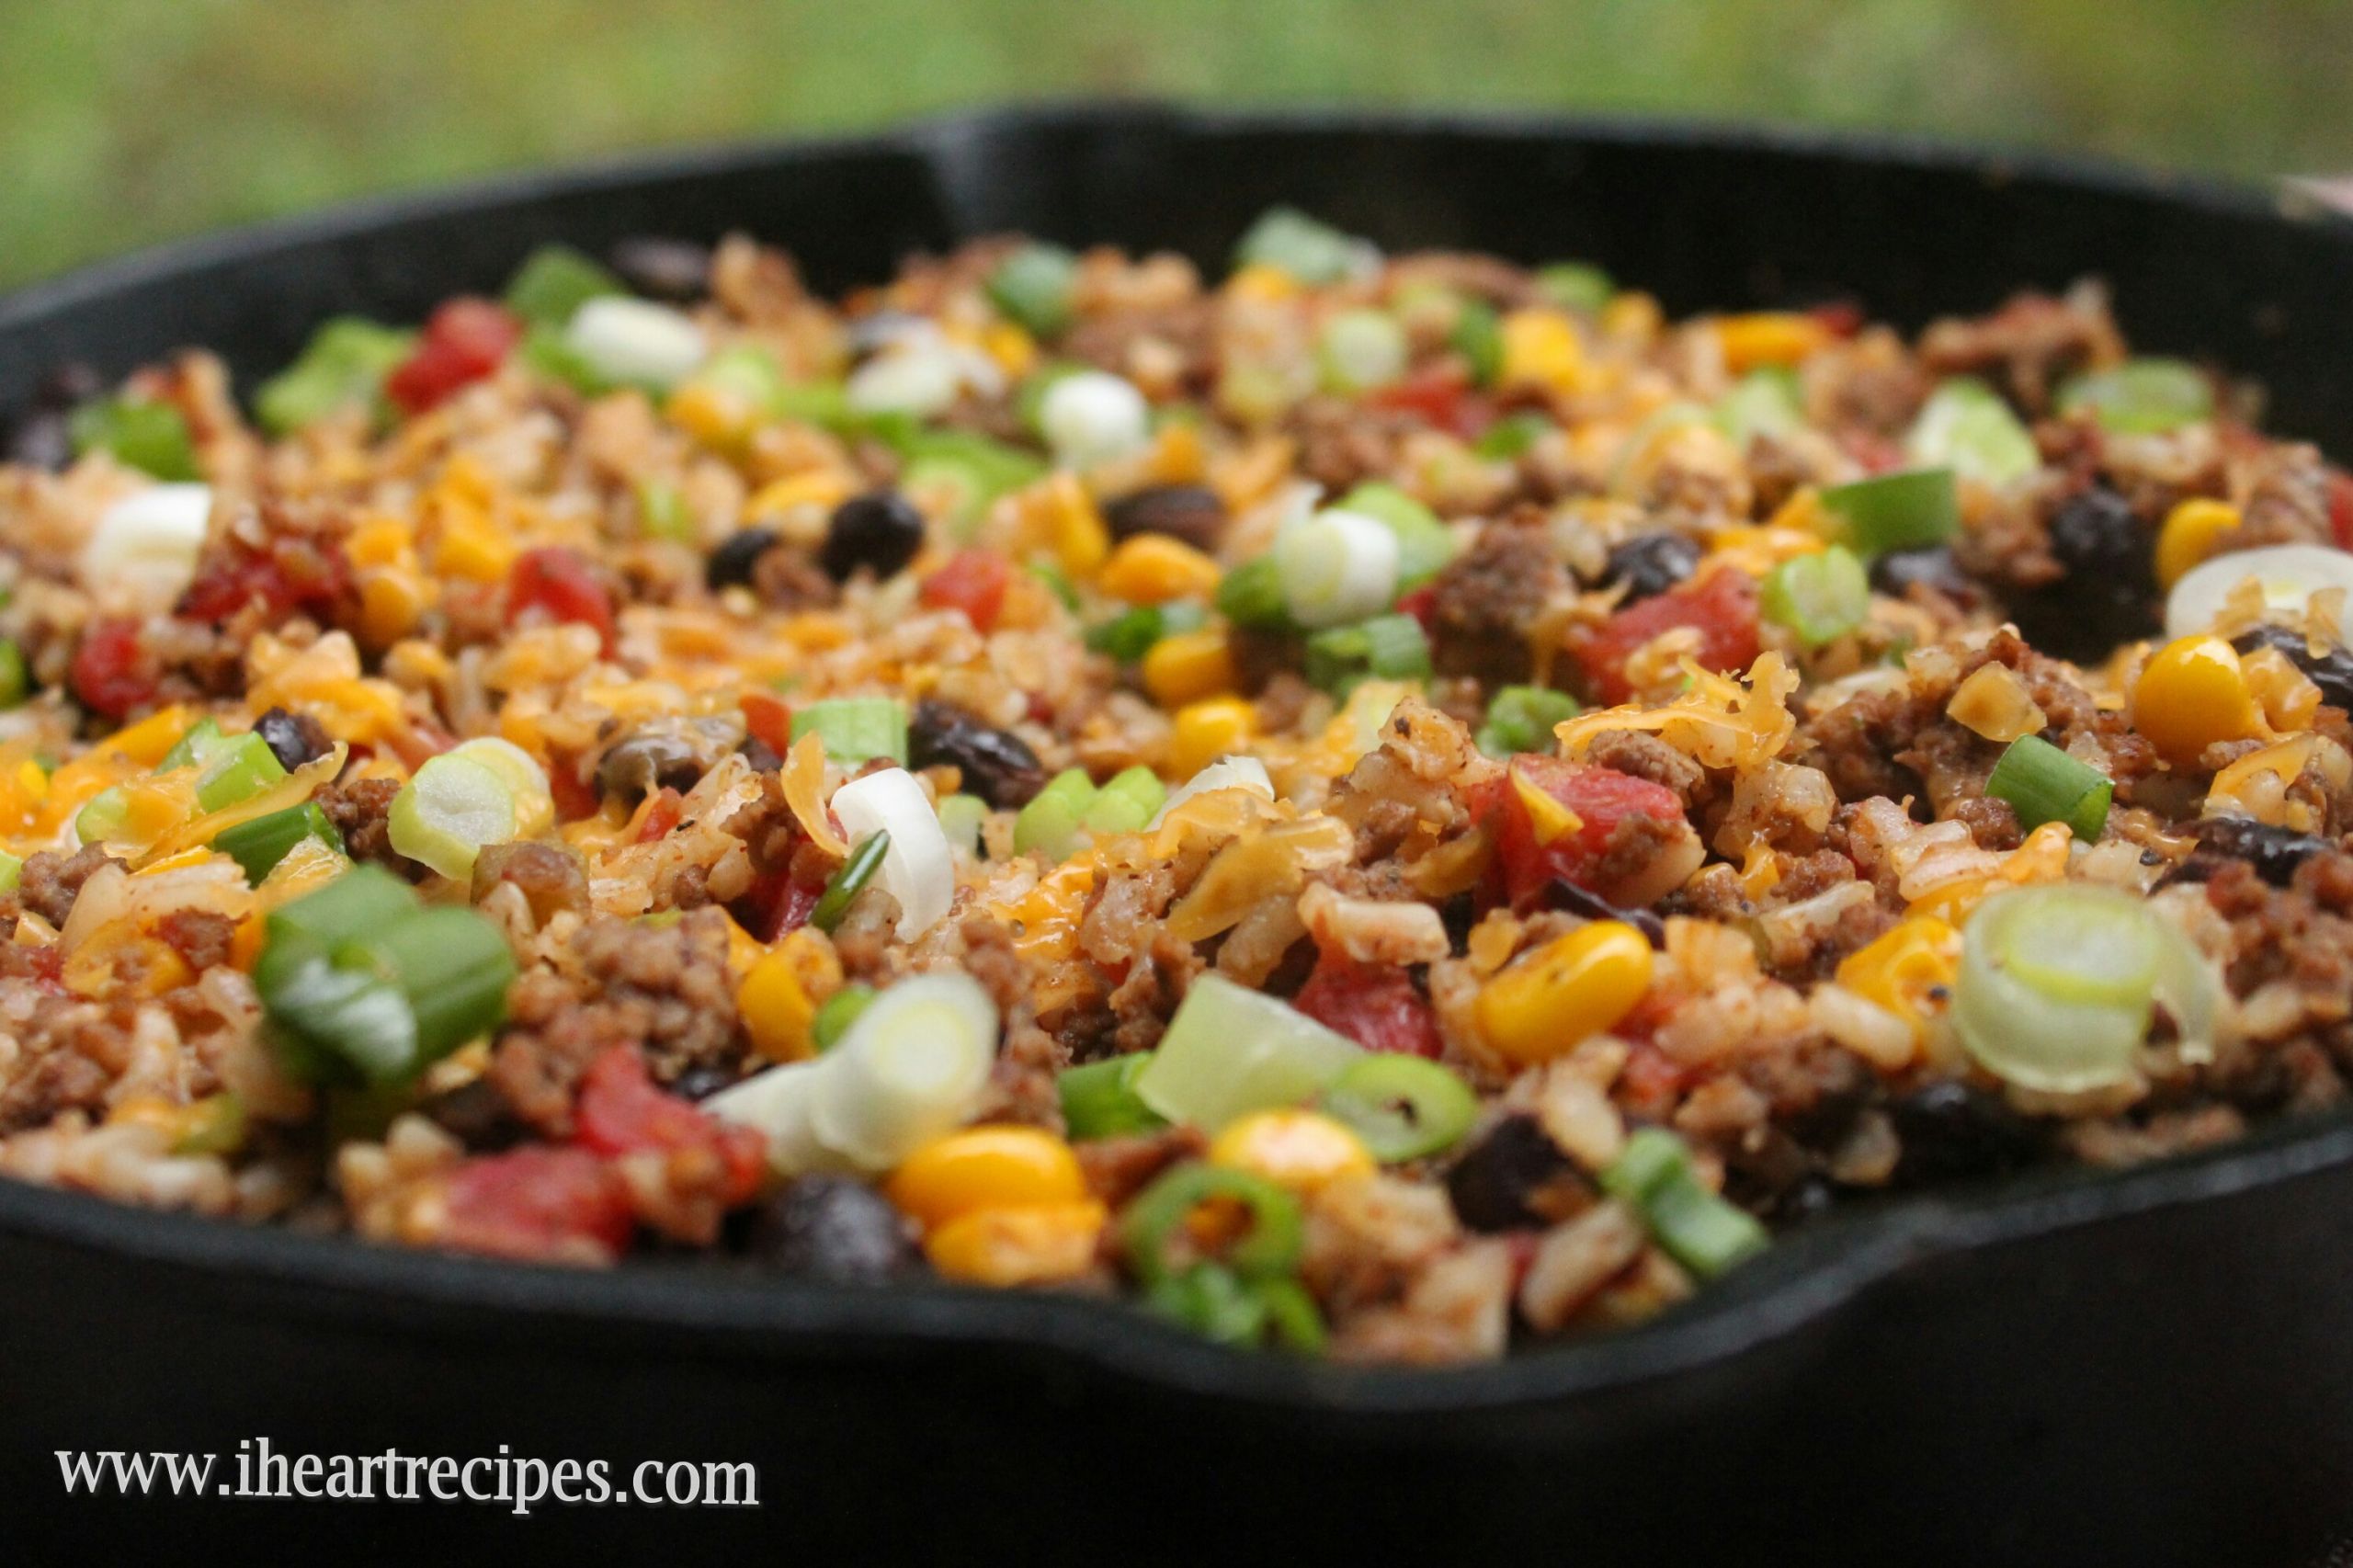 Recipes That Use Ground Beef
 Tex Mex Beef Skillet